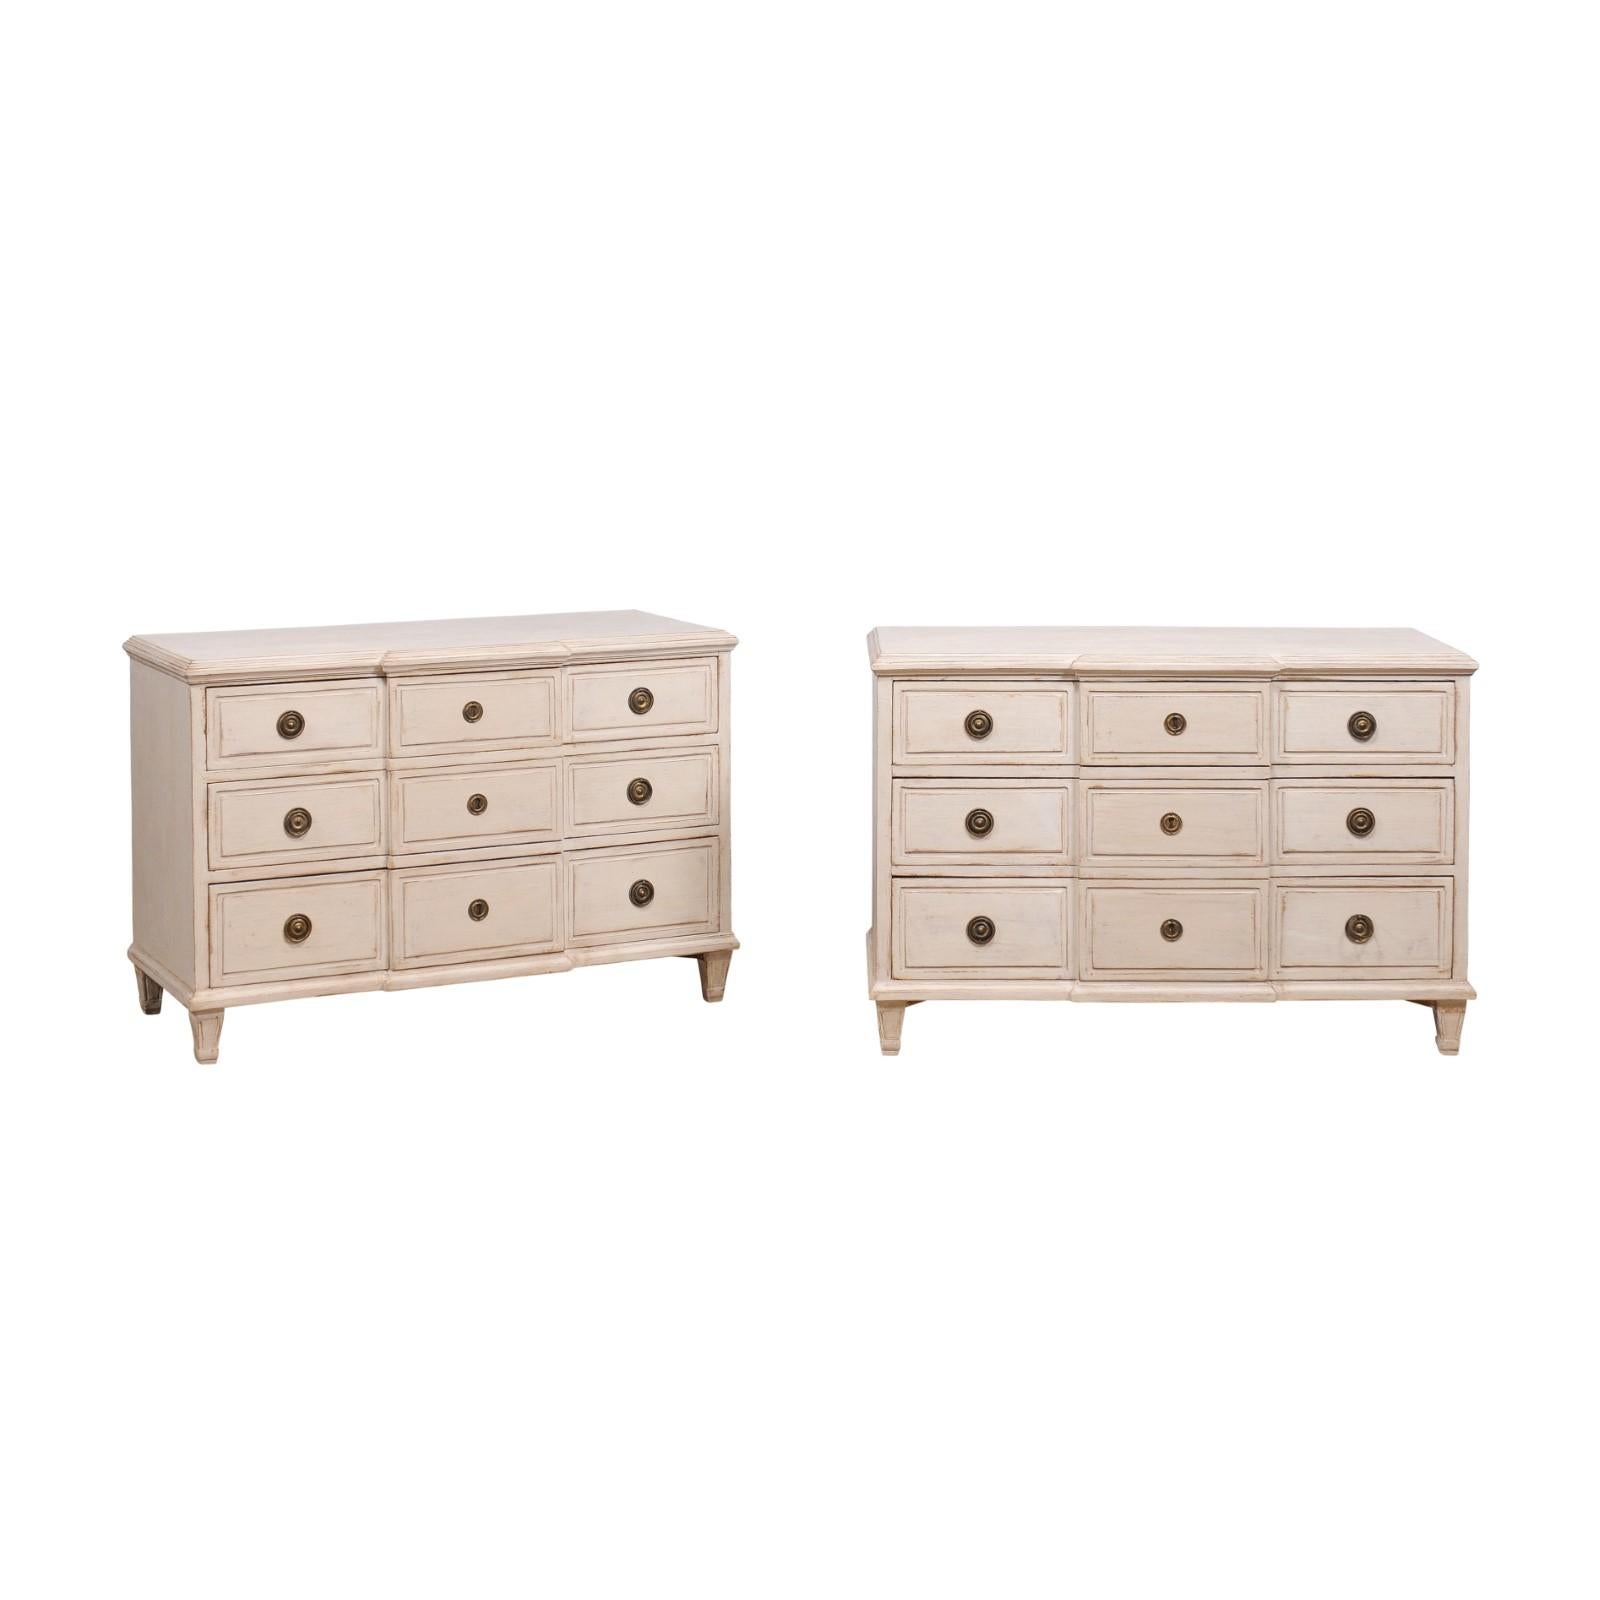 A pair of Swedish Gustavian style breakfront chests from the 20th century with off white / beige painted finish, three drawers, tapered feet and brass hardware. This exquisite pair of Swedish Gustavian style breakfront chests exudes timeless